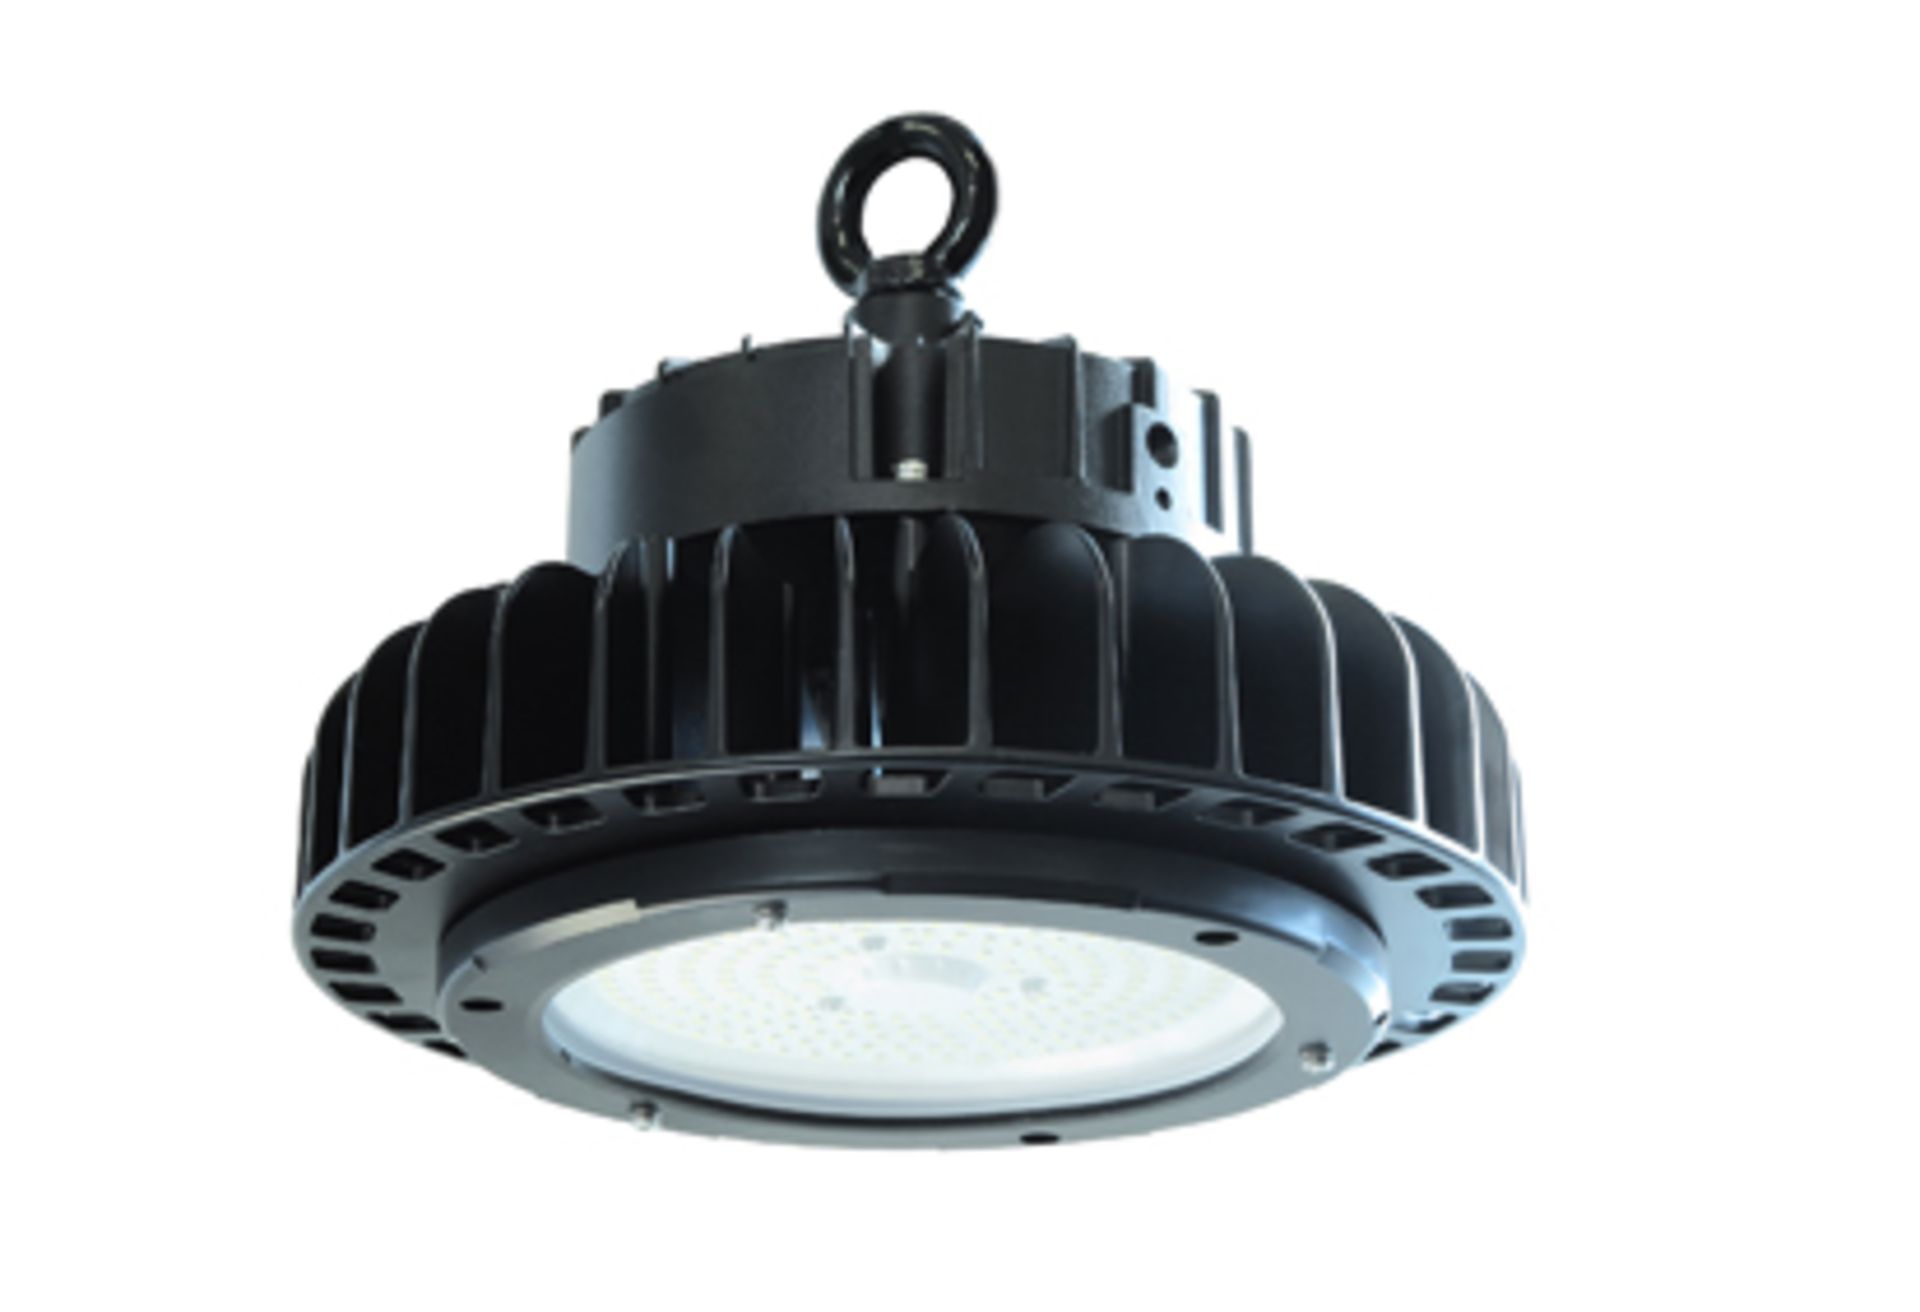 1 100w 13000LM High Bay Light, product code T4HB13000A (located on mezzanine) - Image 5 of 6